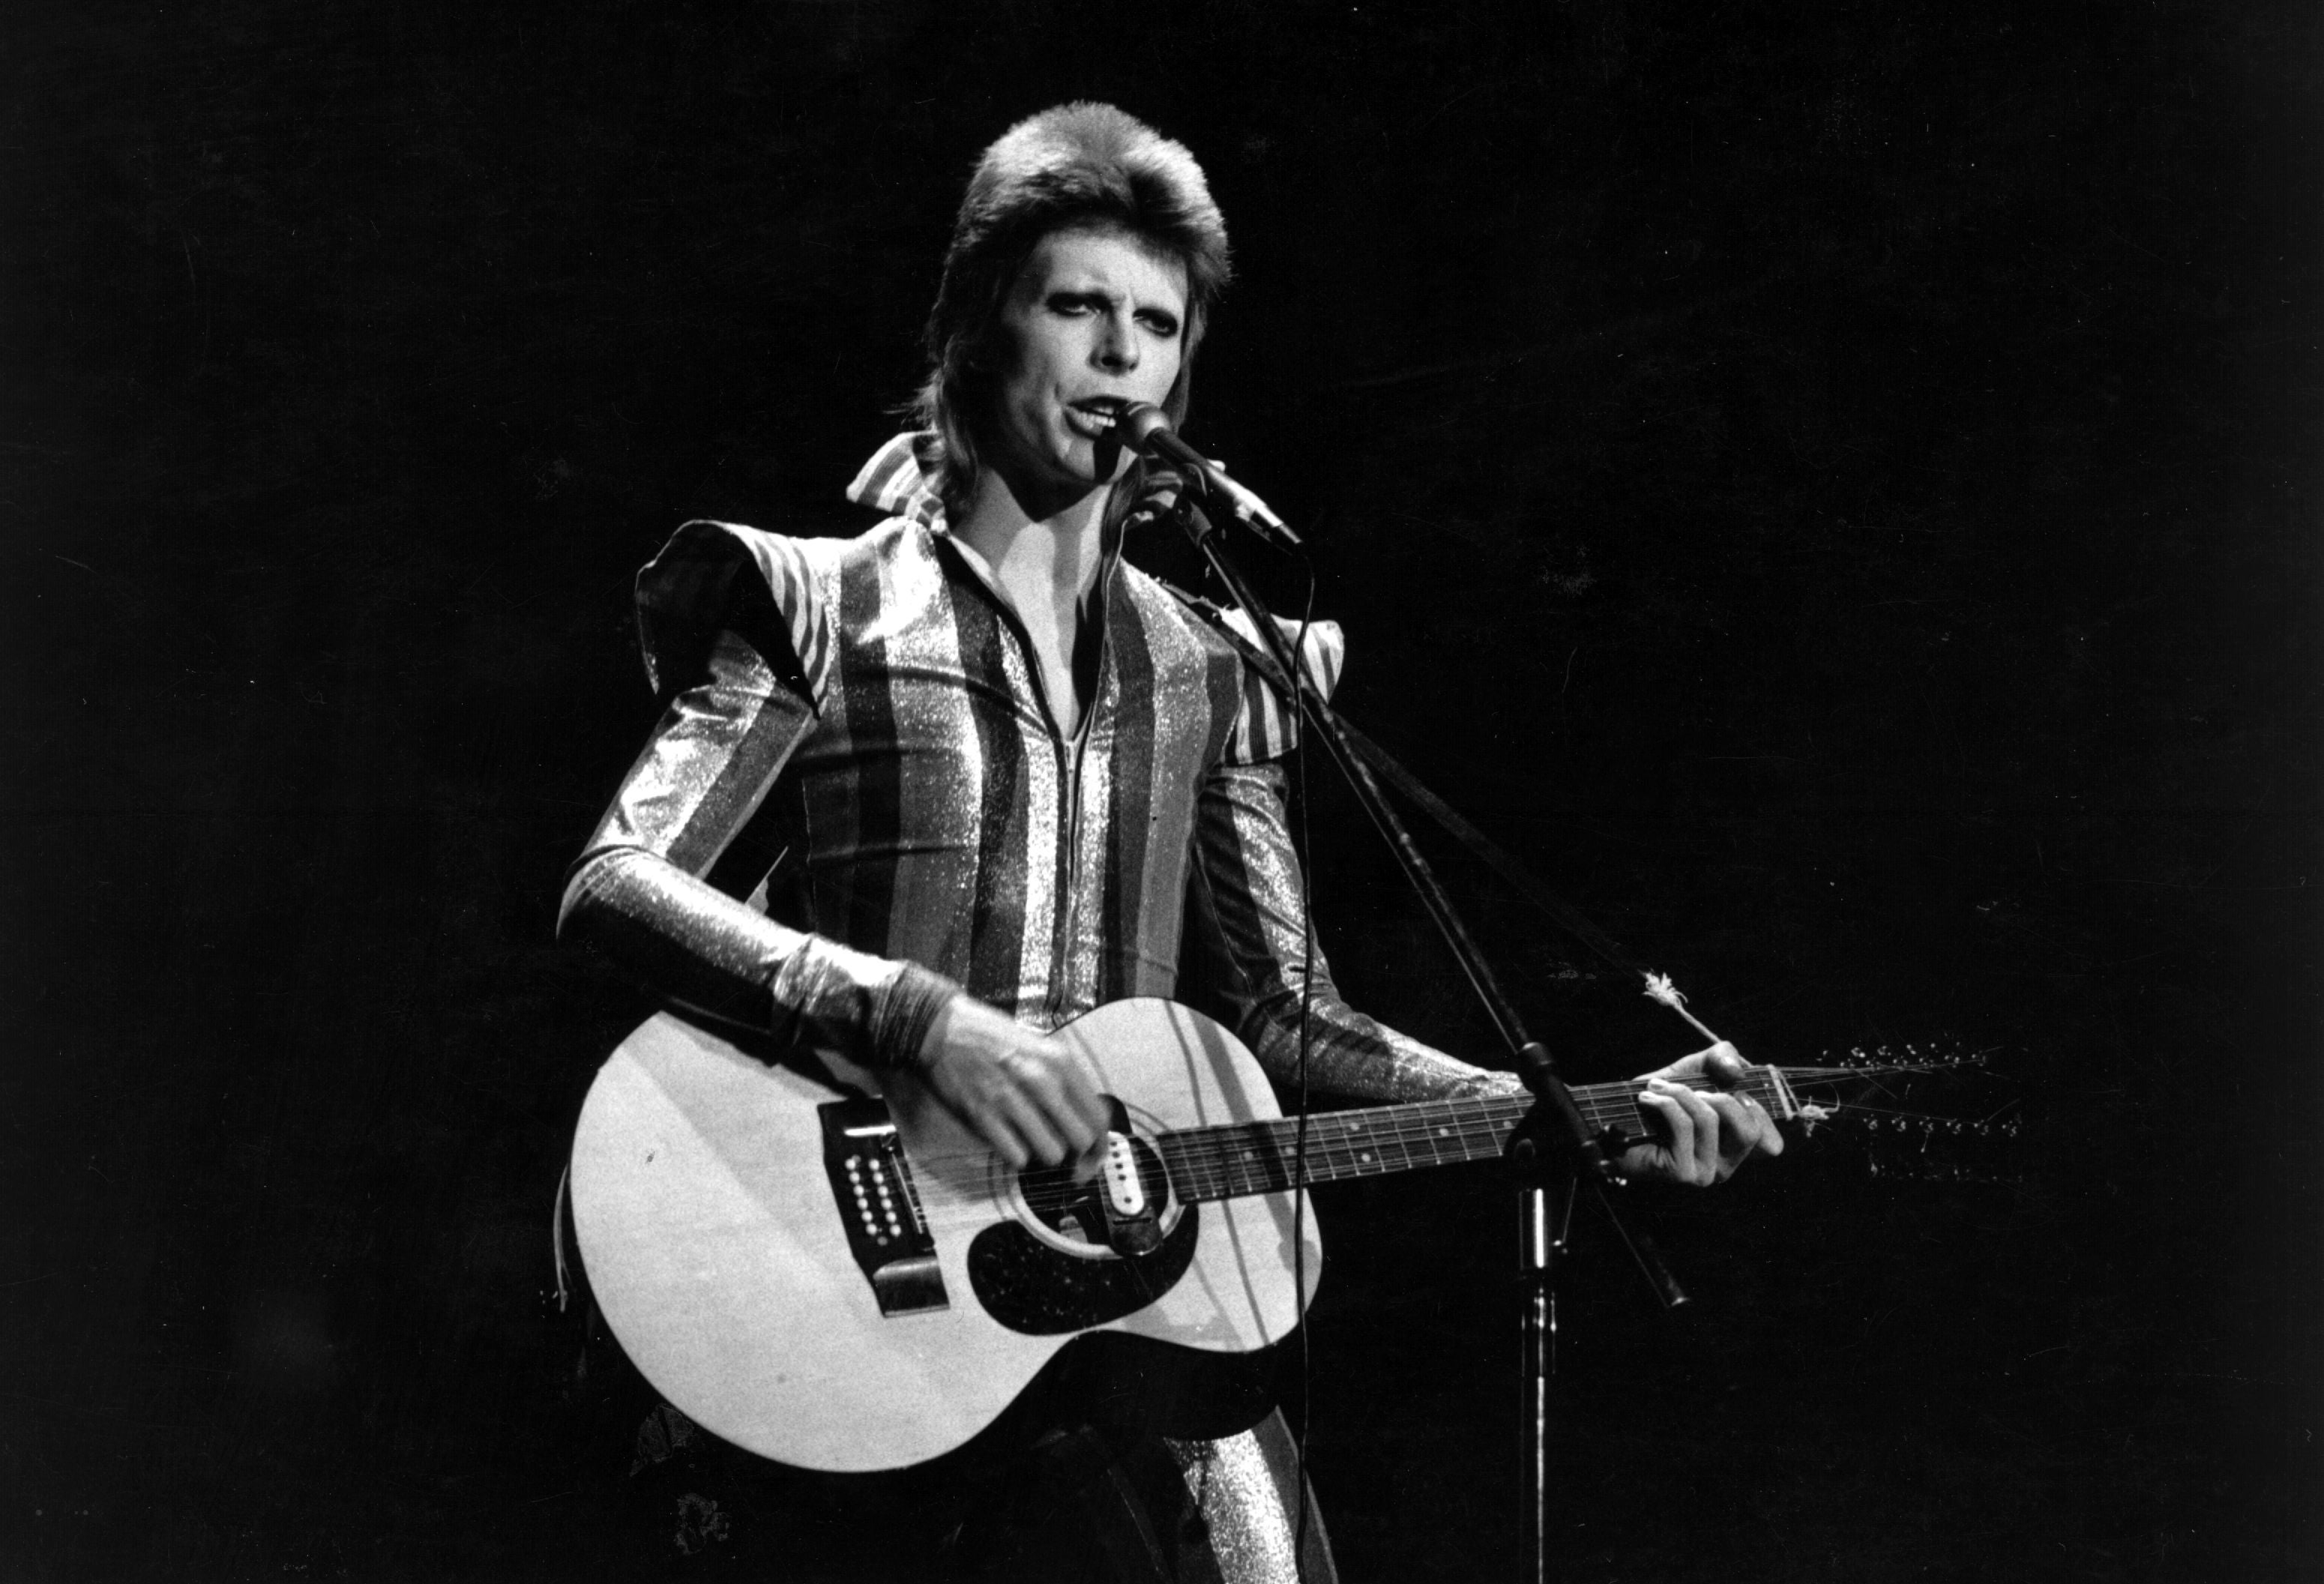 The day of Ziggy Stardust’s release coincided with the final day of a landmark climate gathering in Sweden